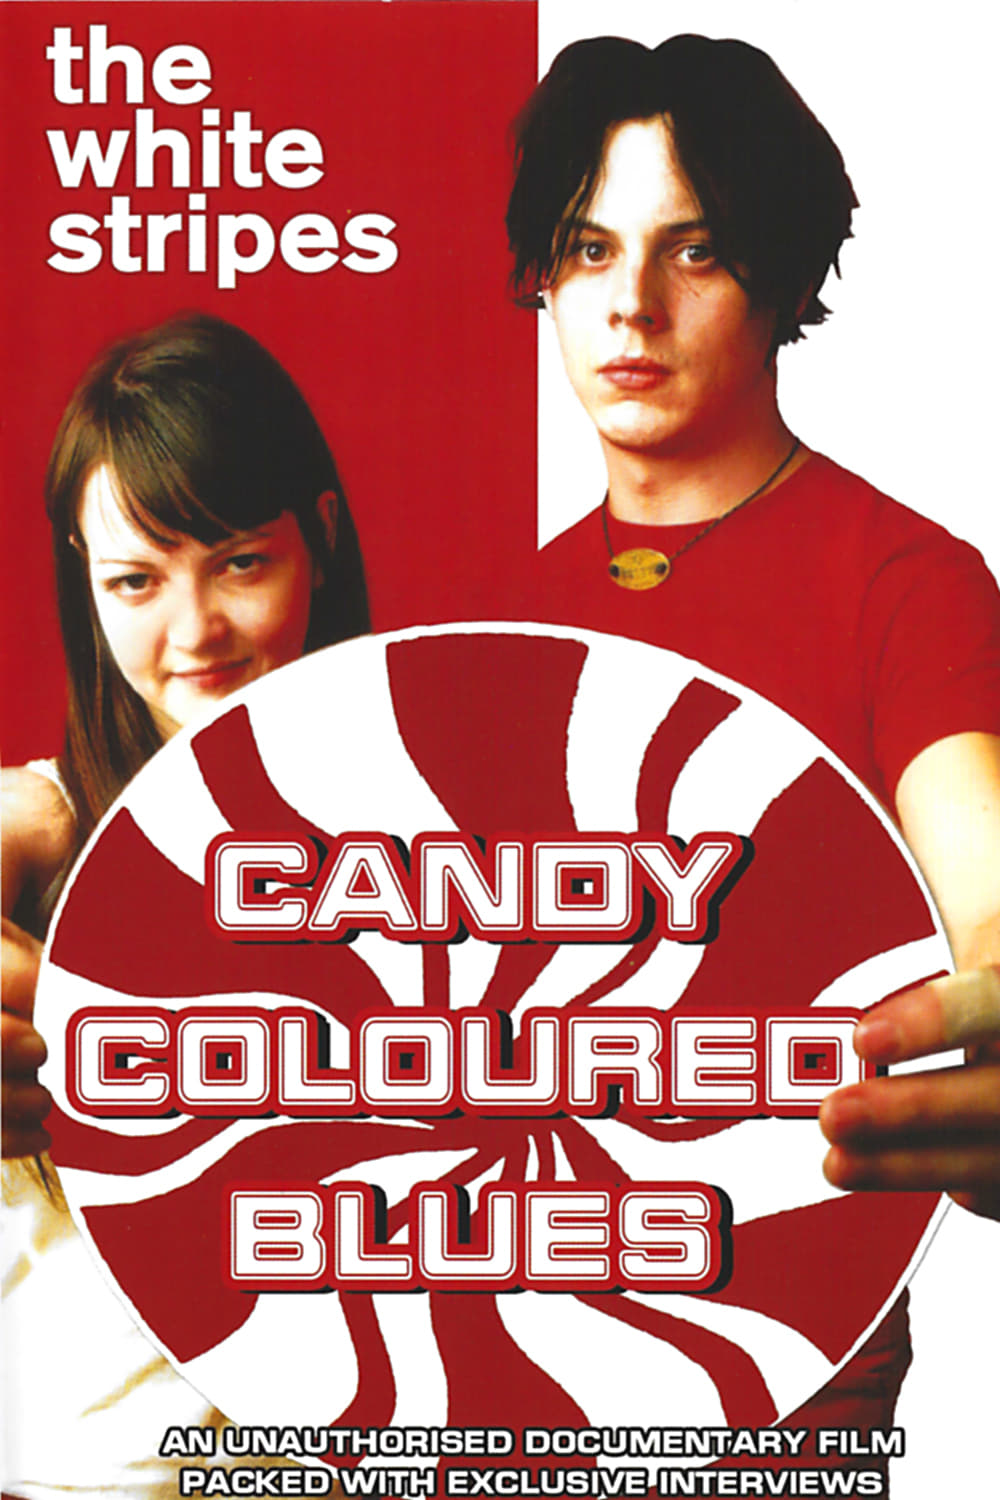 The White Stripes: Candy Coloured Blues